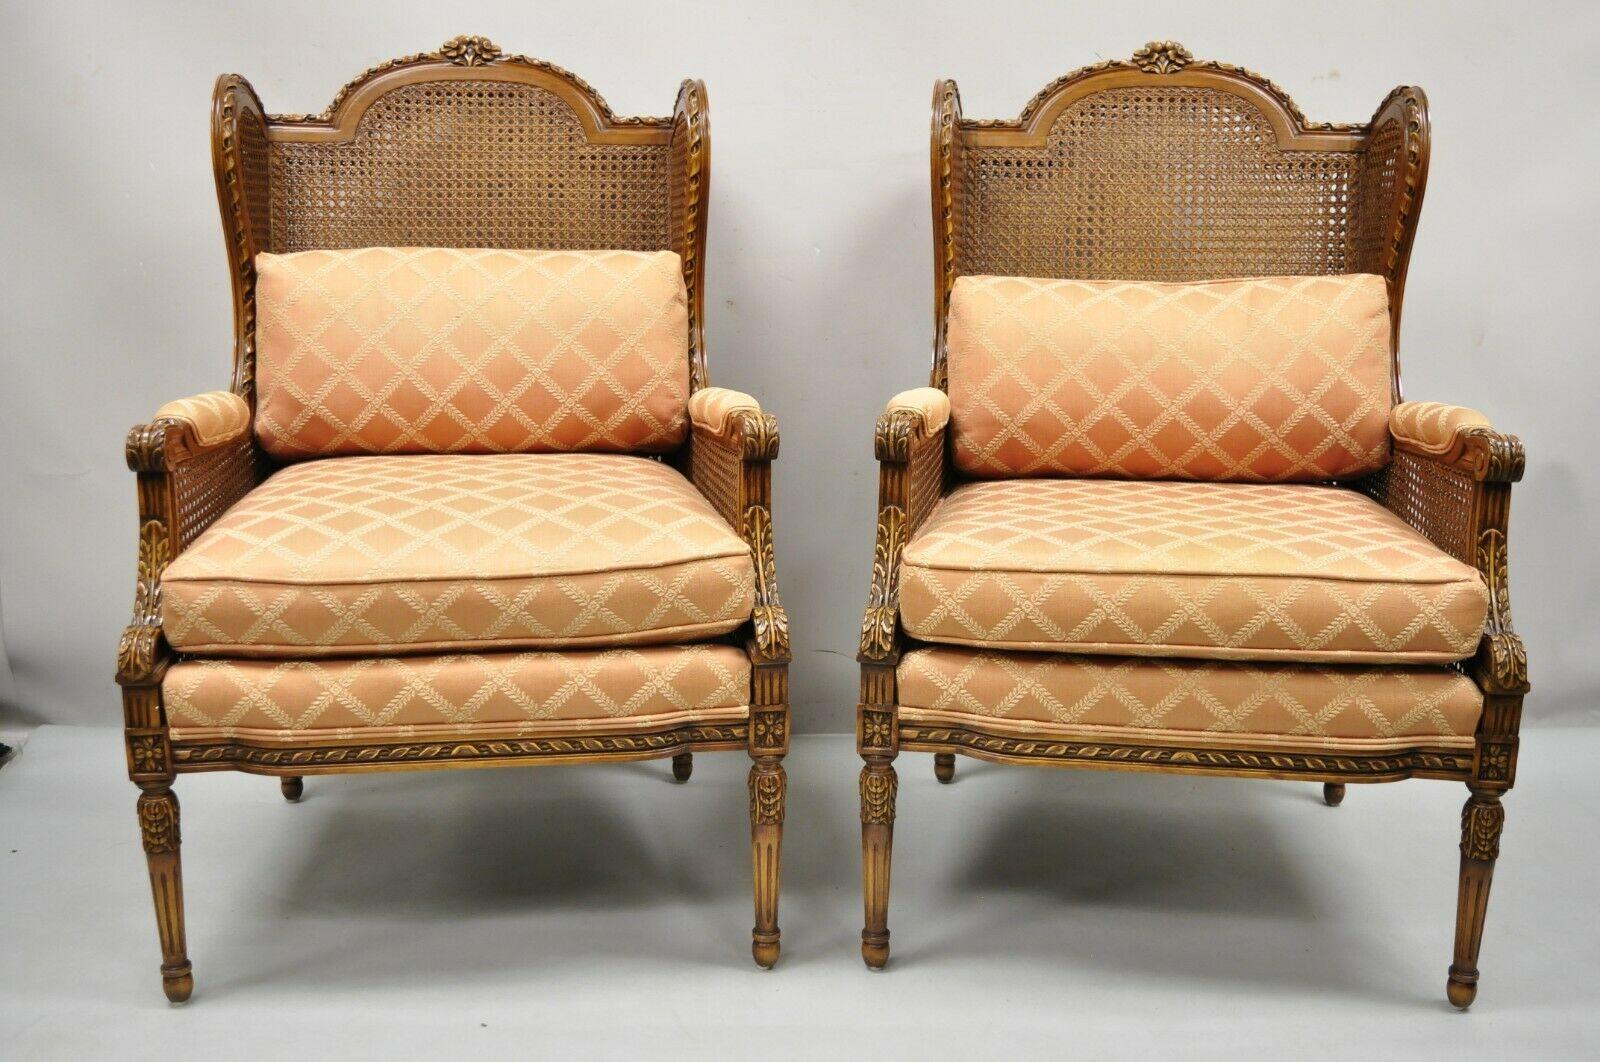 Vintage French Louis XVl style cane bergere lounge chairs - a pair. Item features double cane solid wood frames, beautiful wood grain, nicely carved details, tapered legs, very nice vintage pair, quality craftsmanship, great style and form. Circa